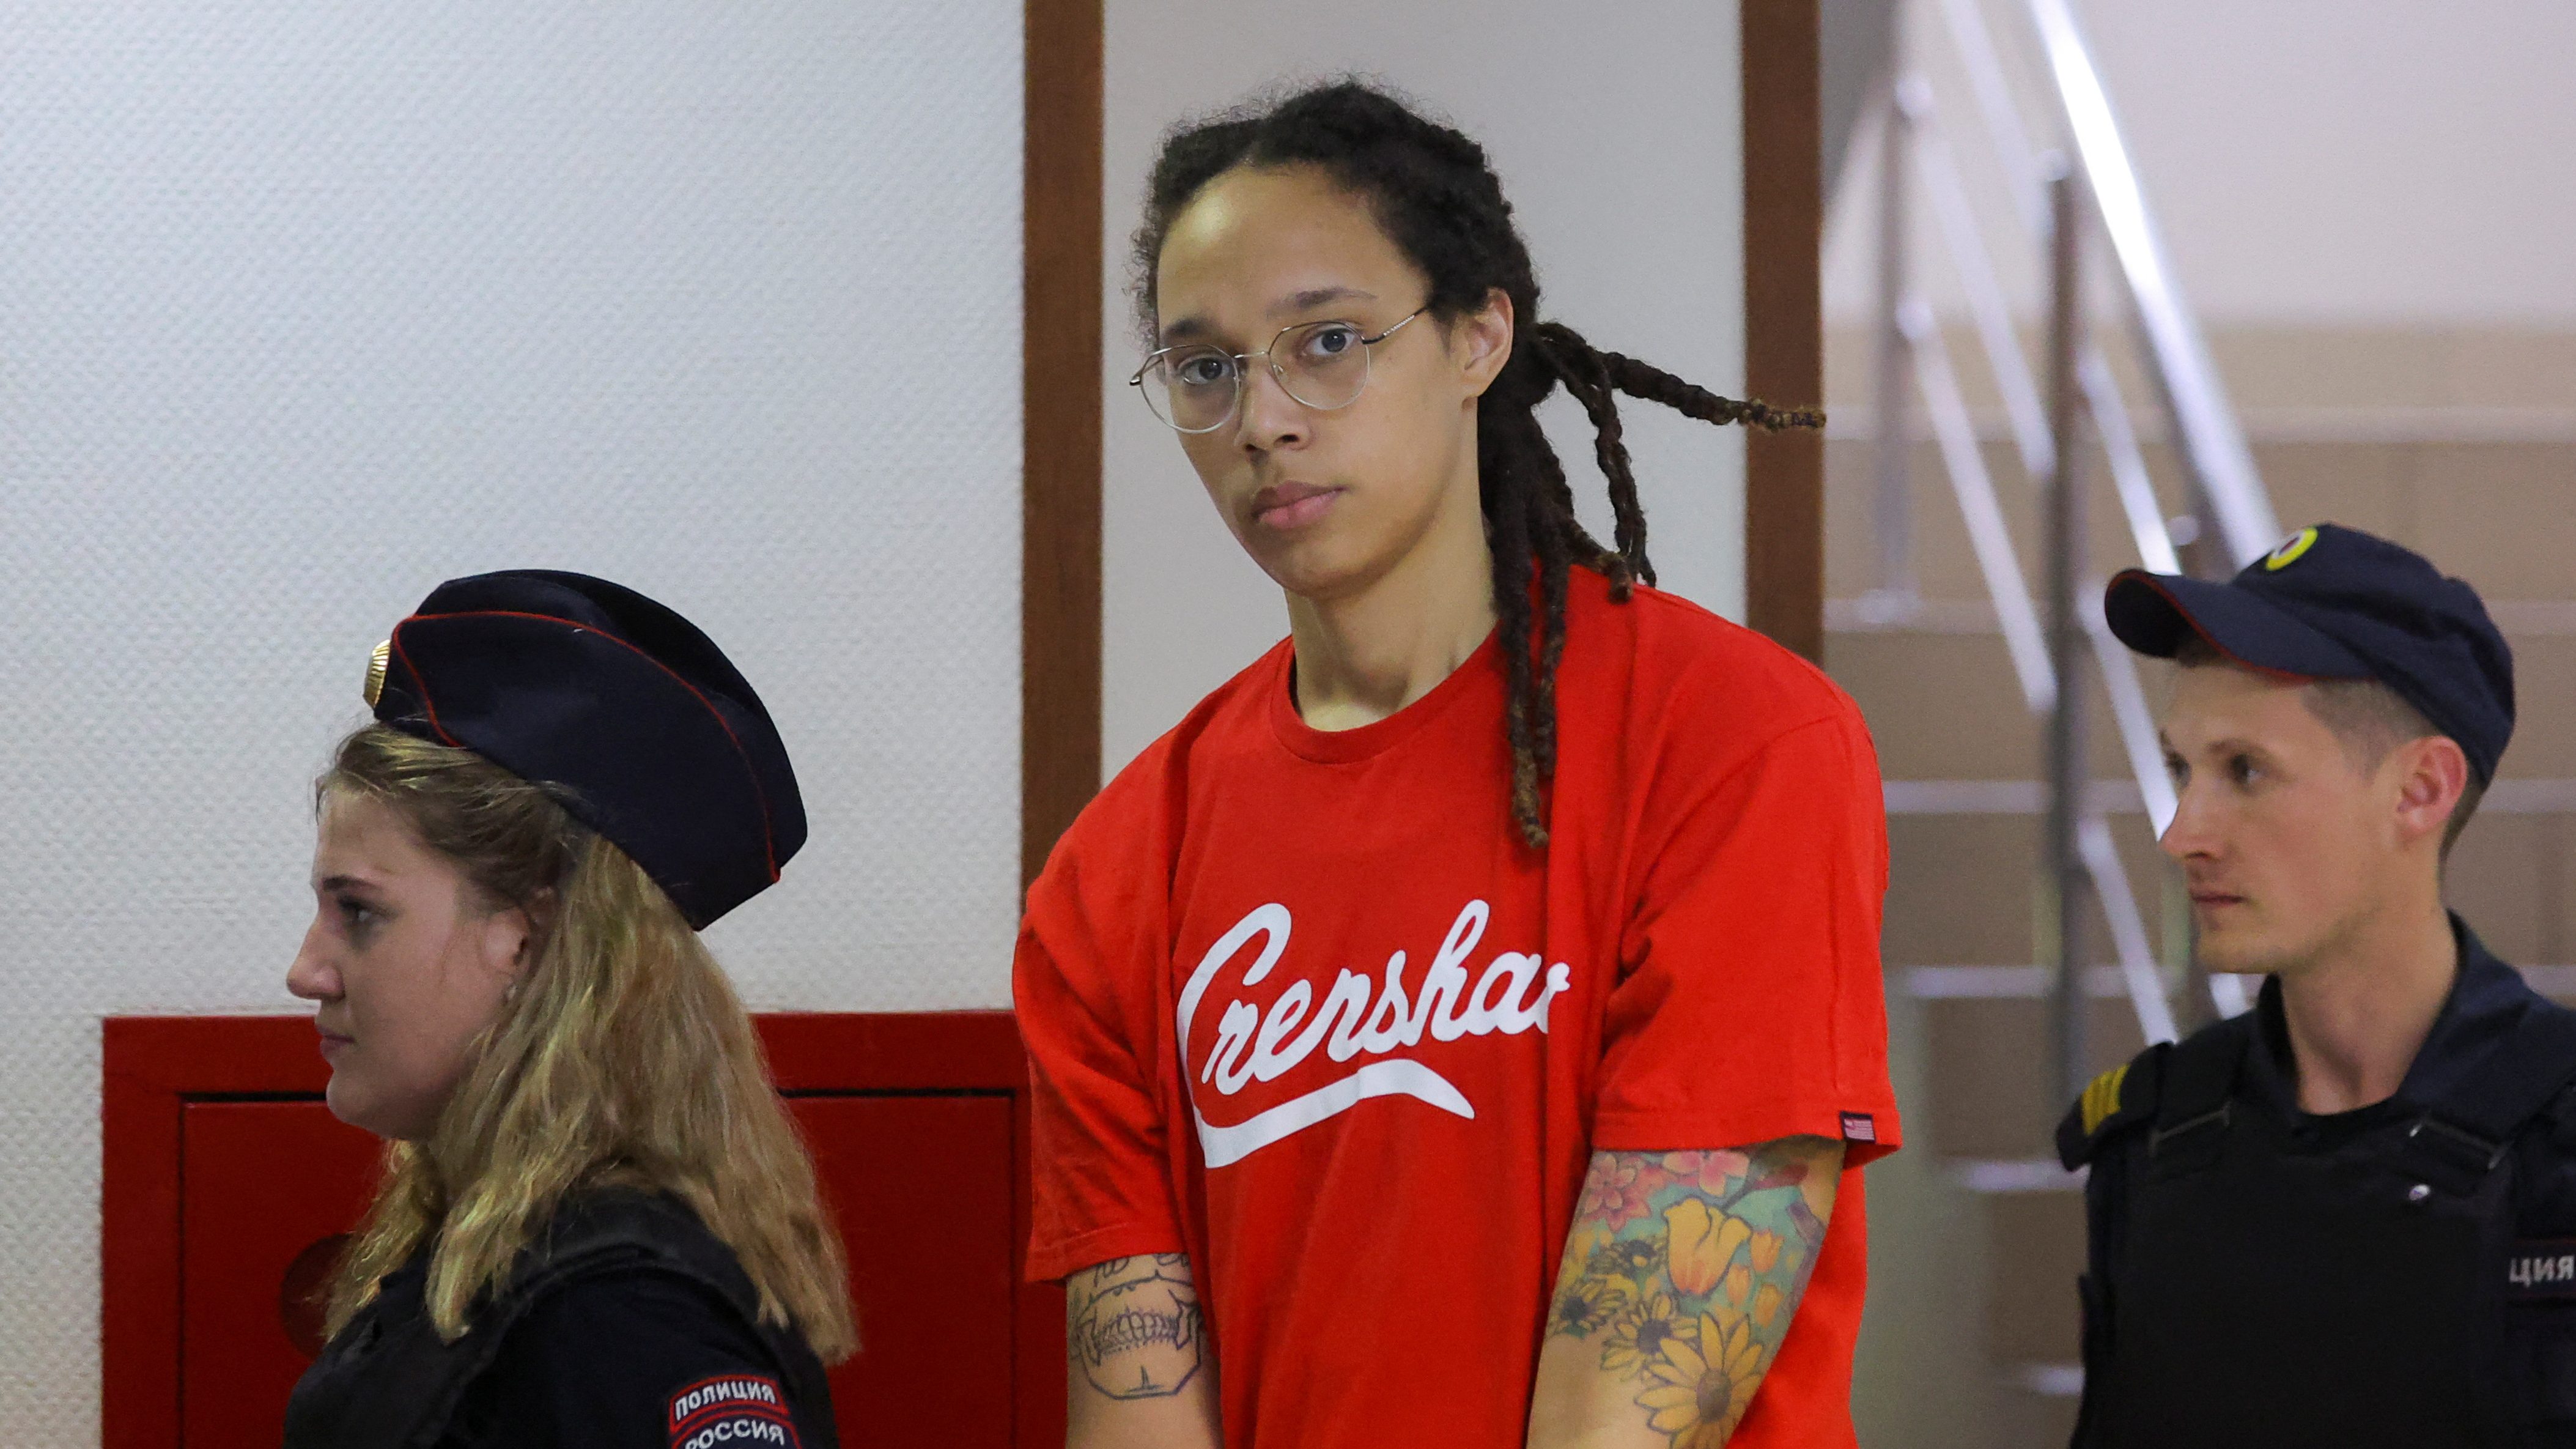 WNBA star Brittney Griner pleaded guilty in Russia following Biden’s call to her family